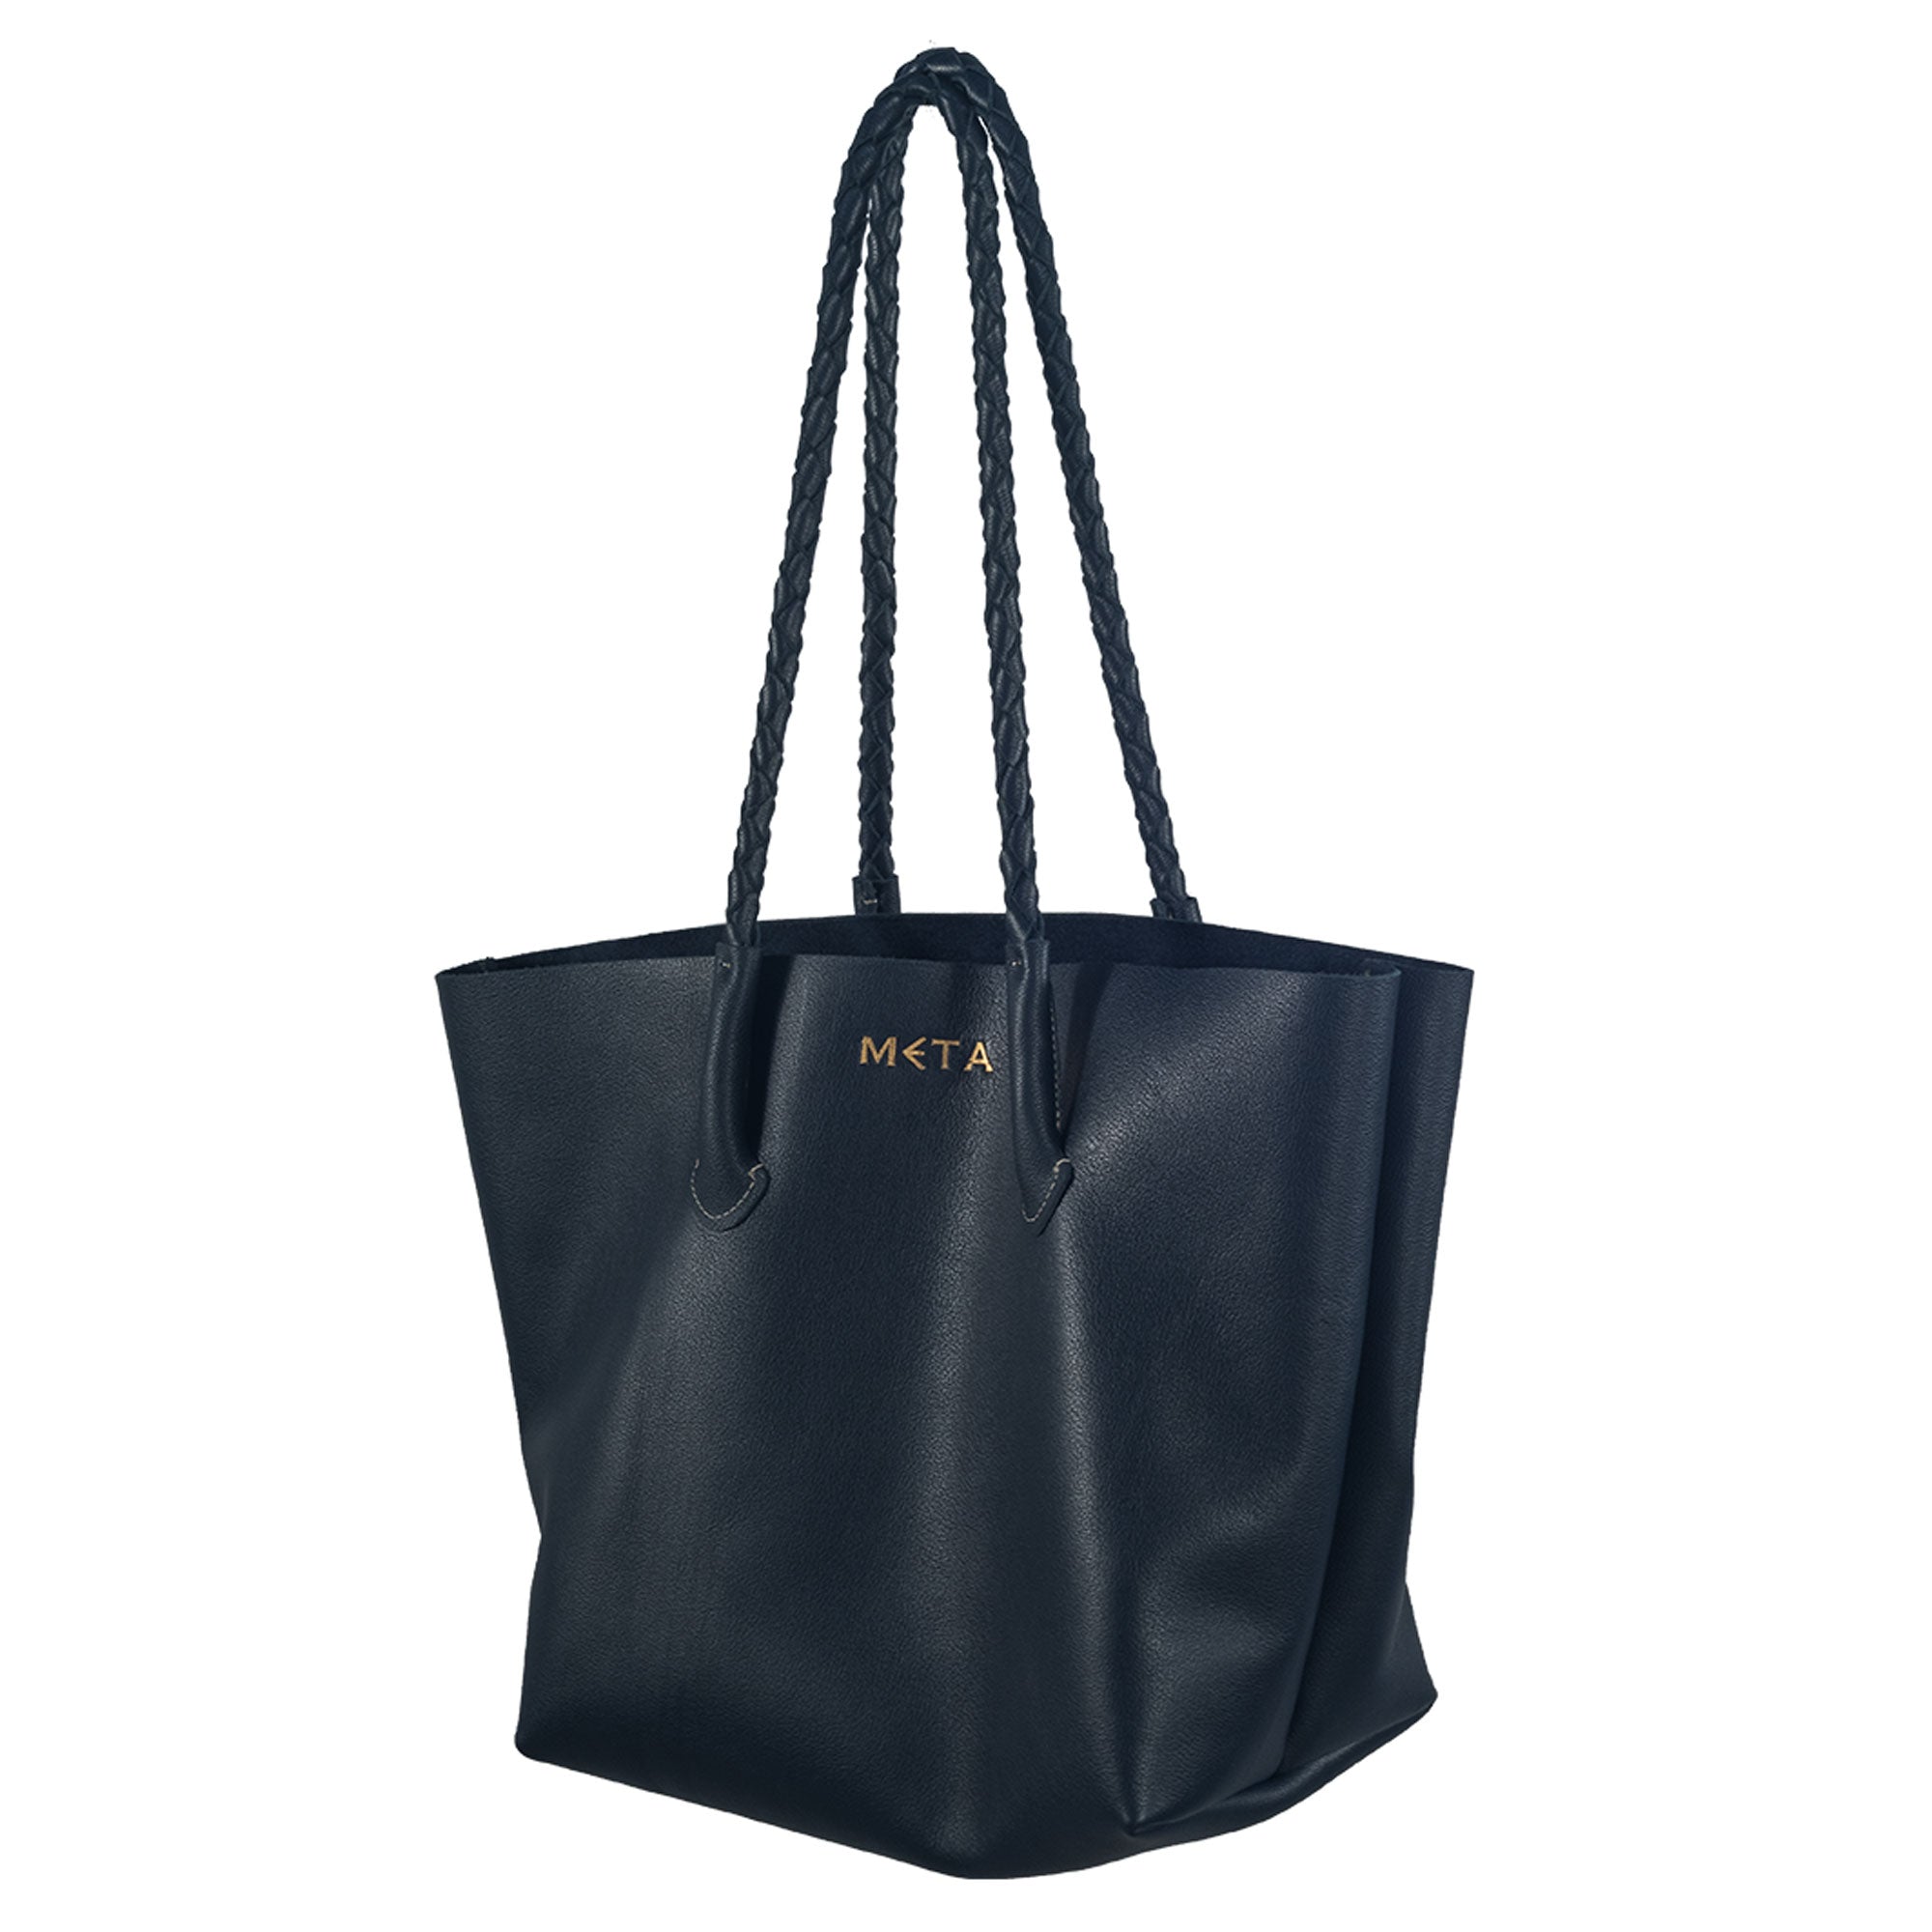 The Riviera Leather Tote Bag